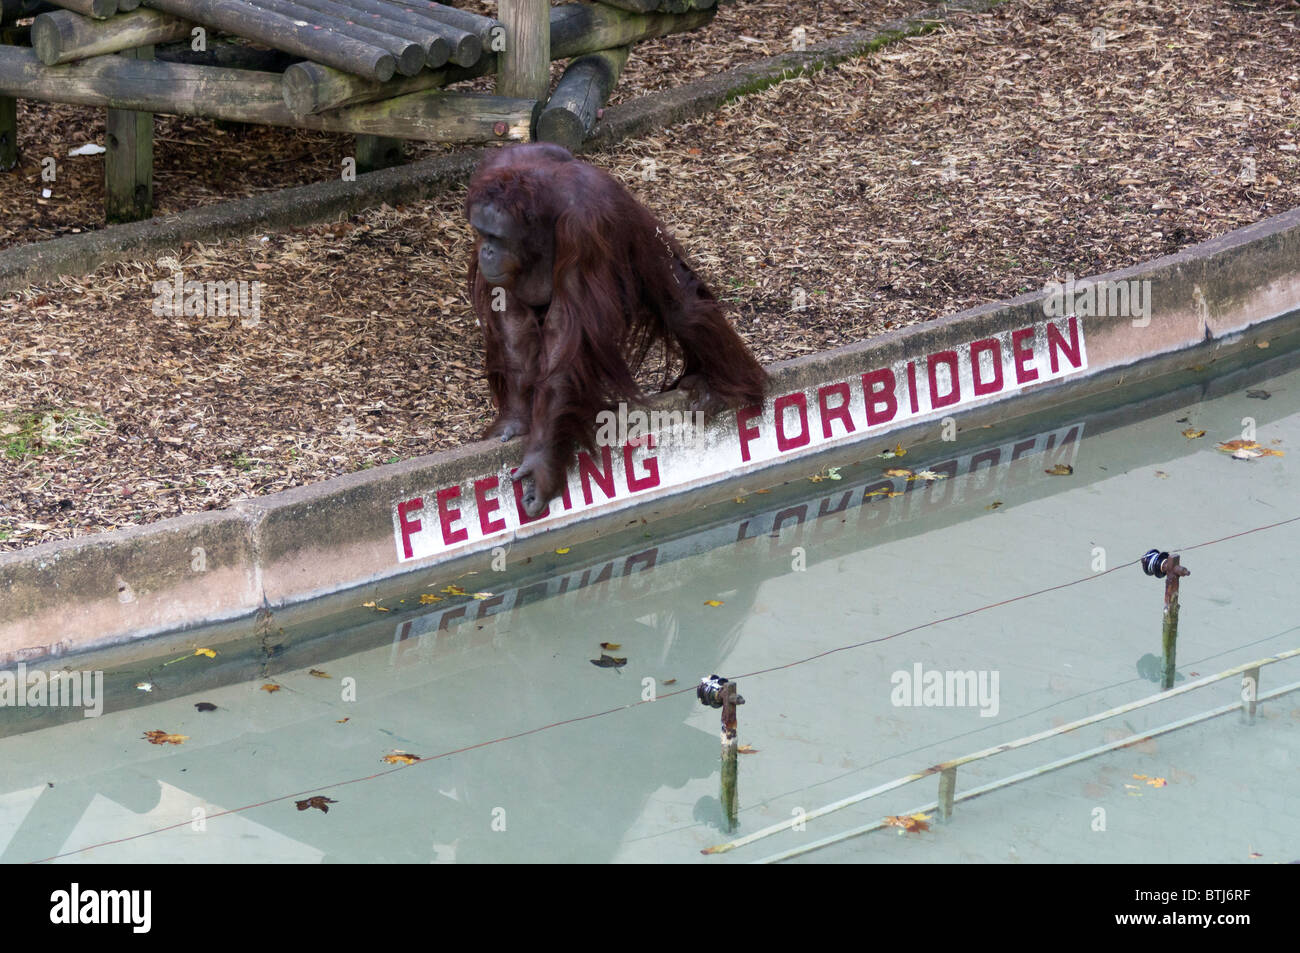 Dudley Zoo West Midlands UK - orang-utang pacing its enclosure on concrete moat edge with electric fence Stock Photo